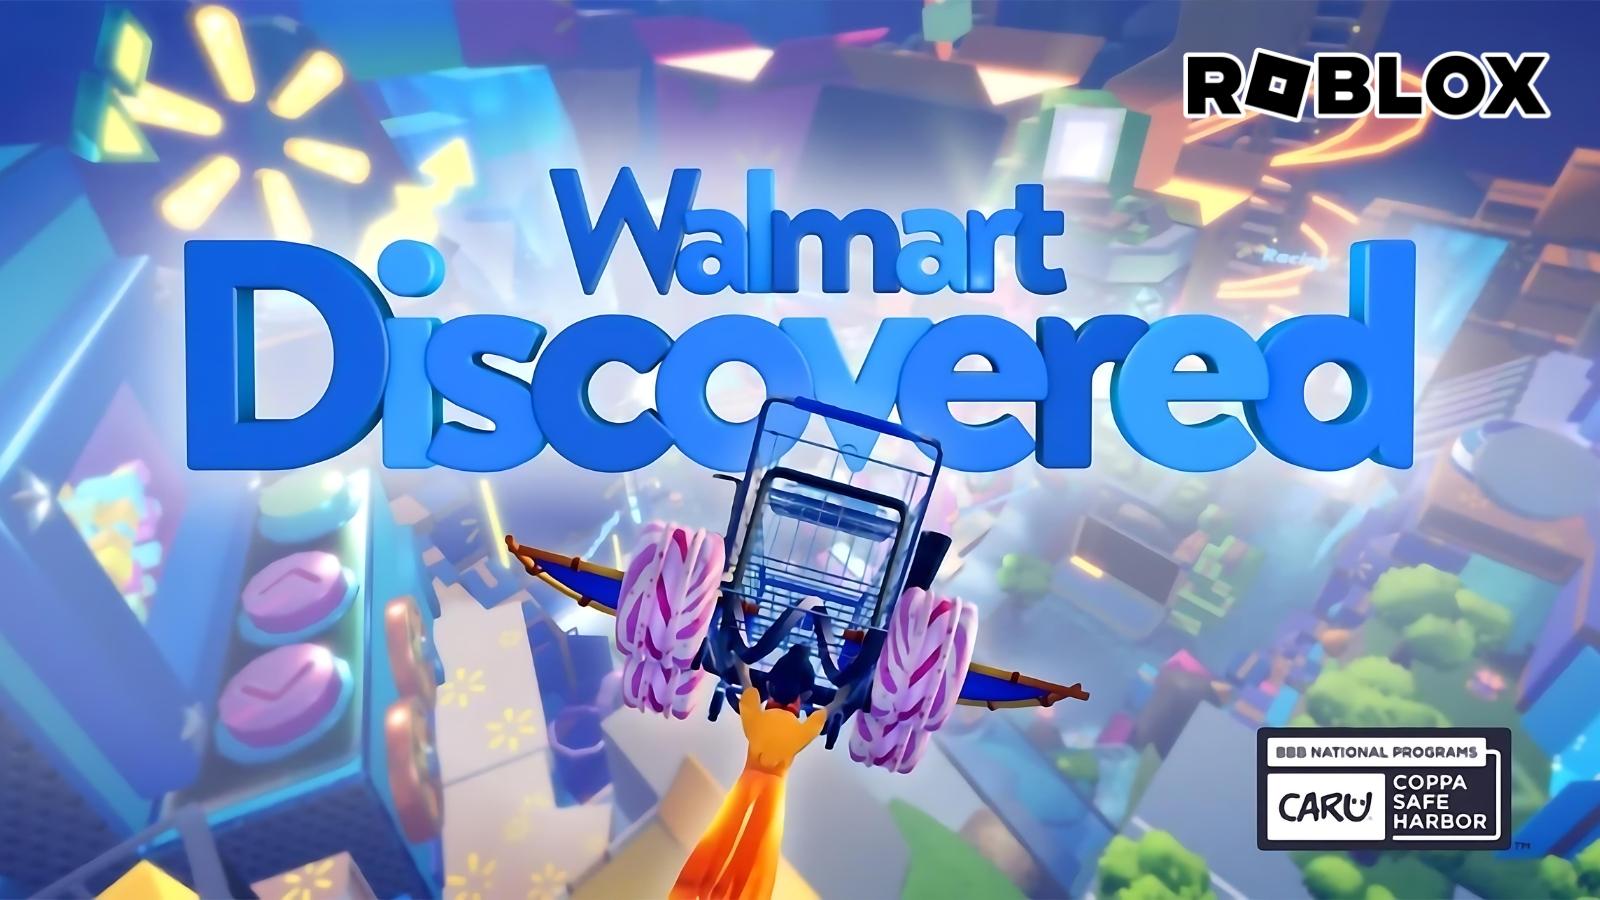 Walmart Discovered cover in Roblox